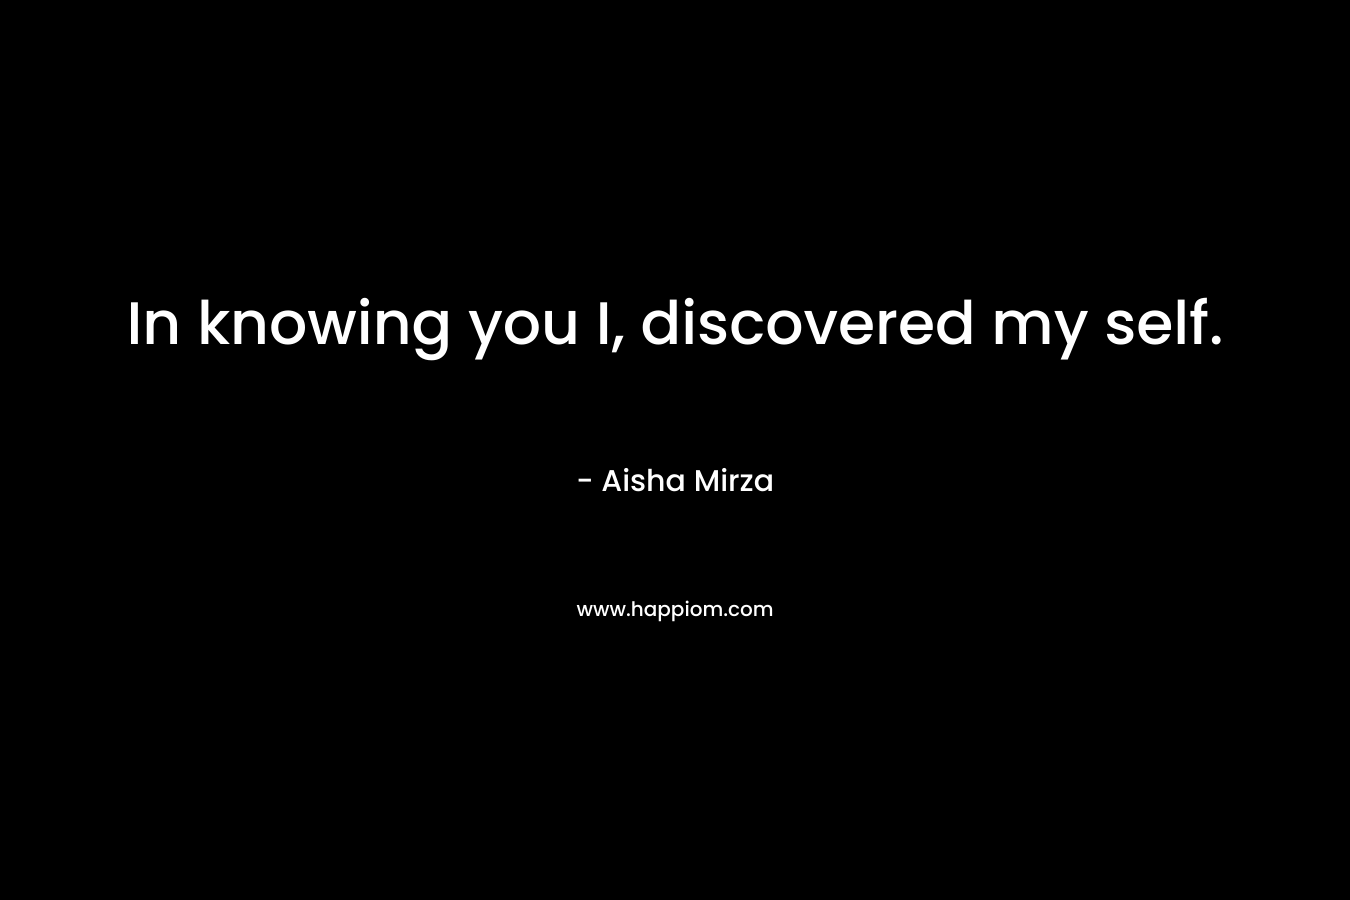 In knowing you I, discovered my self. – Aisha Mirza